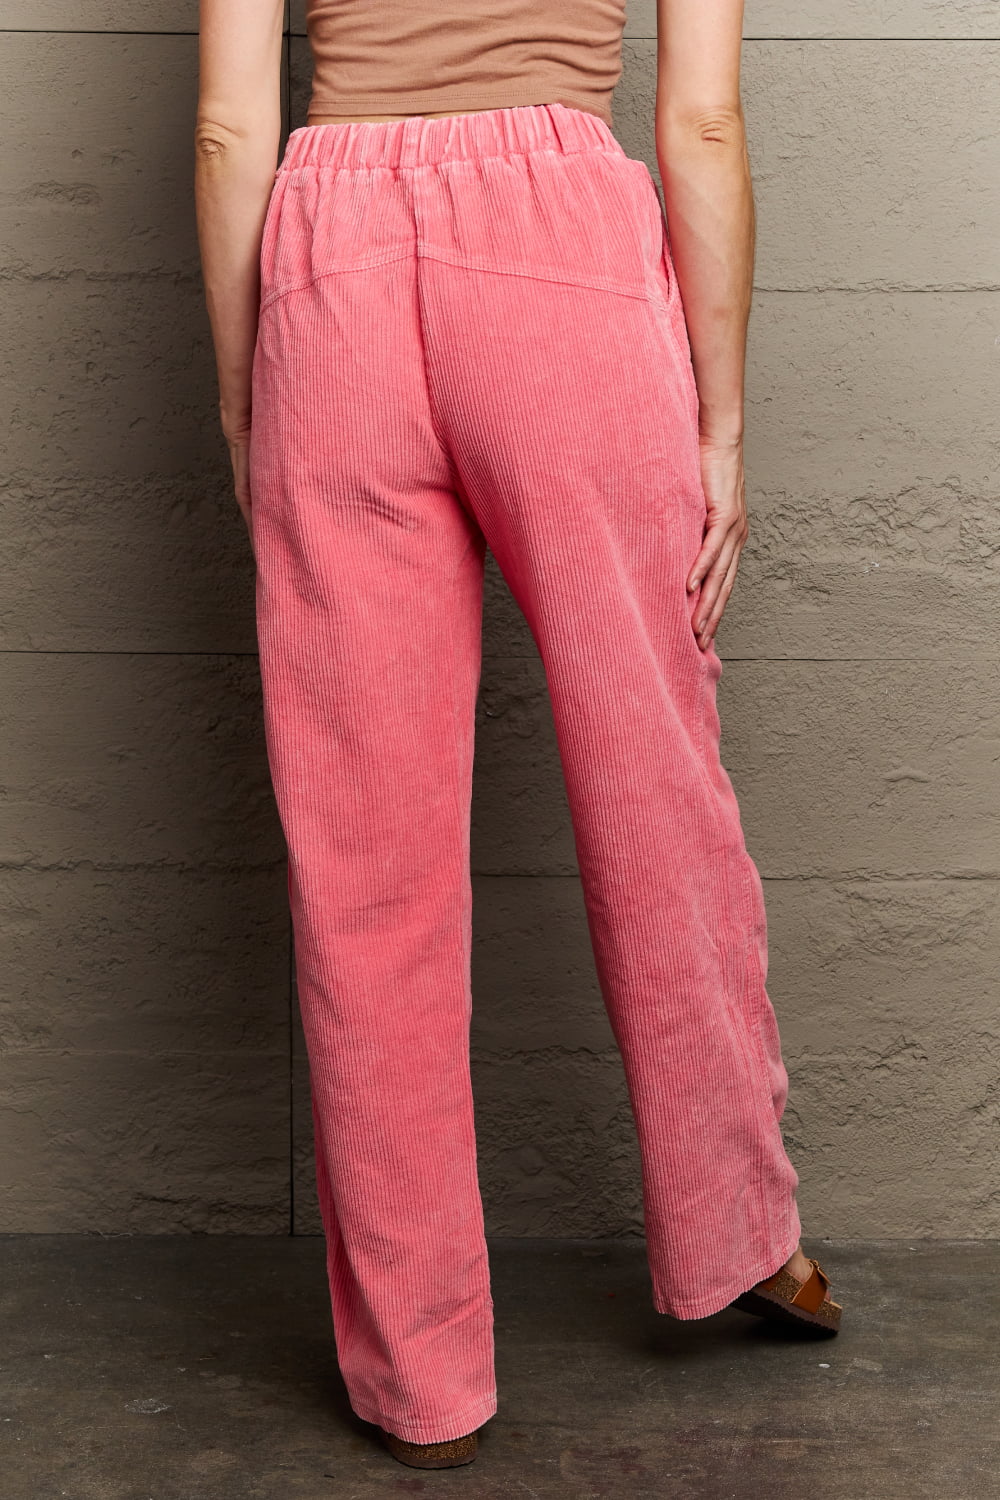 Dim Gray POL  Leap Of Faith Corduroy Straight Fit Pants in Neon Pink Sentient Beauty Fashions Apparel &amp; Accessories